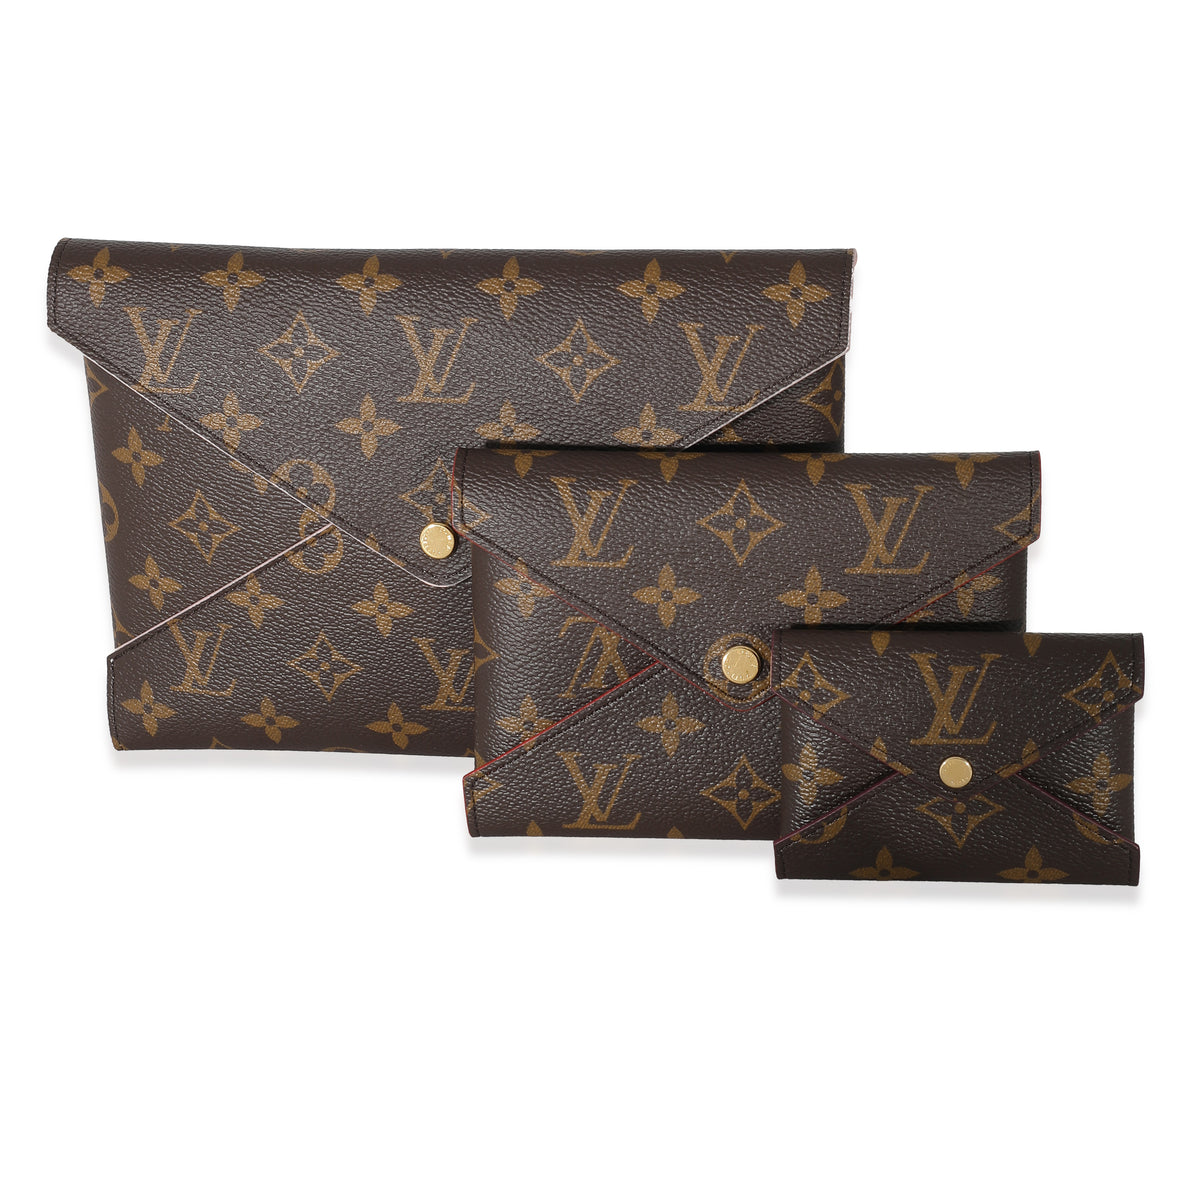 Kirigami Pochette Other Monogram Canvas - Wallets and Small Leather Goods